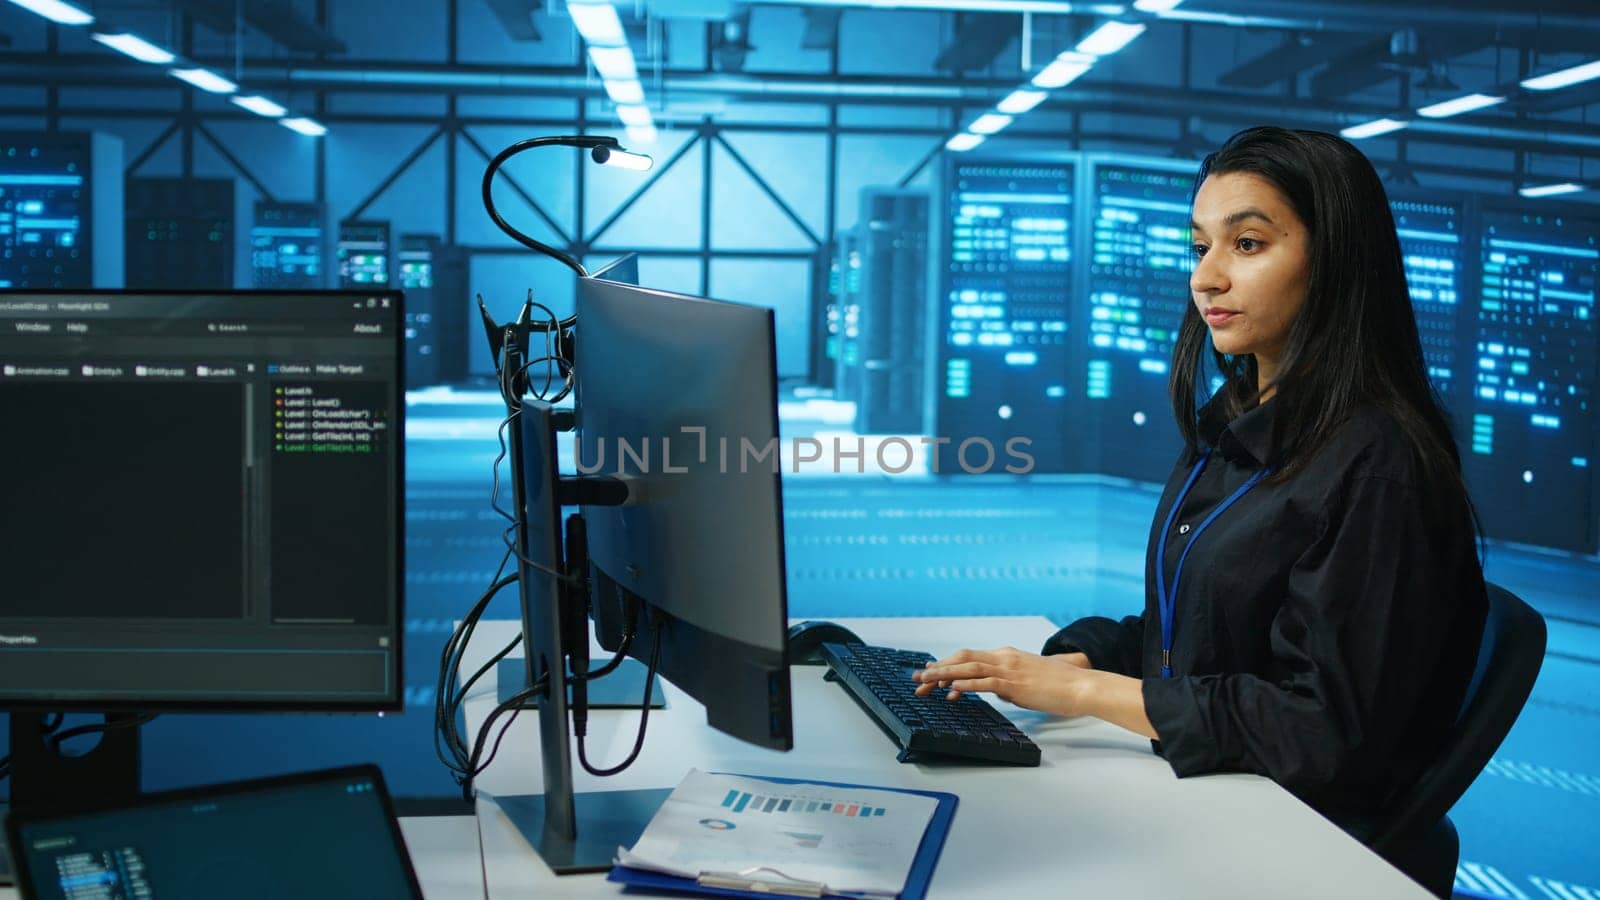 IT engineer in data center using PC to find misconfigurations affecting rackmounts performance. Woman checking servers bottlenecks leading to sluggish data transfer rates and malfunctions